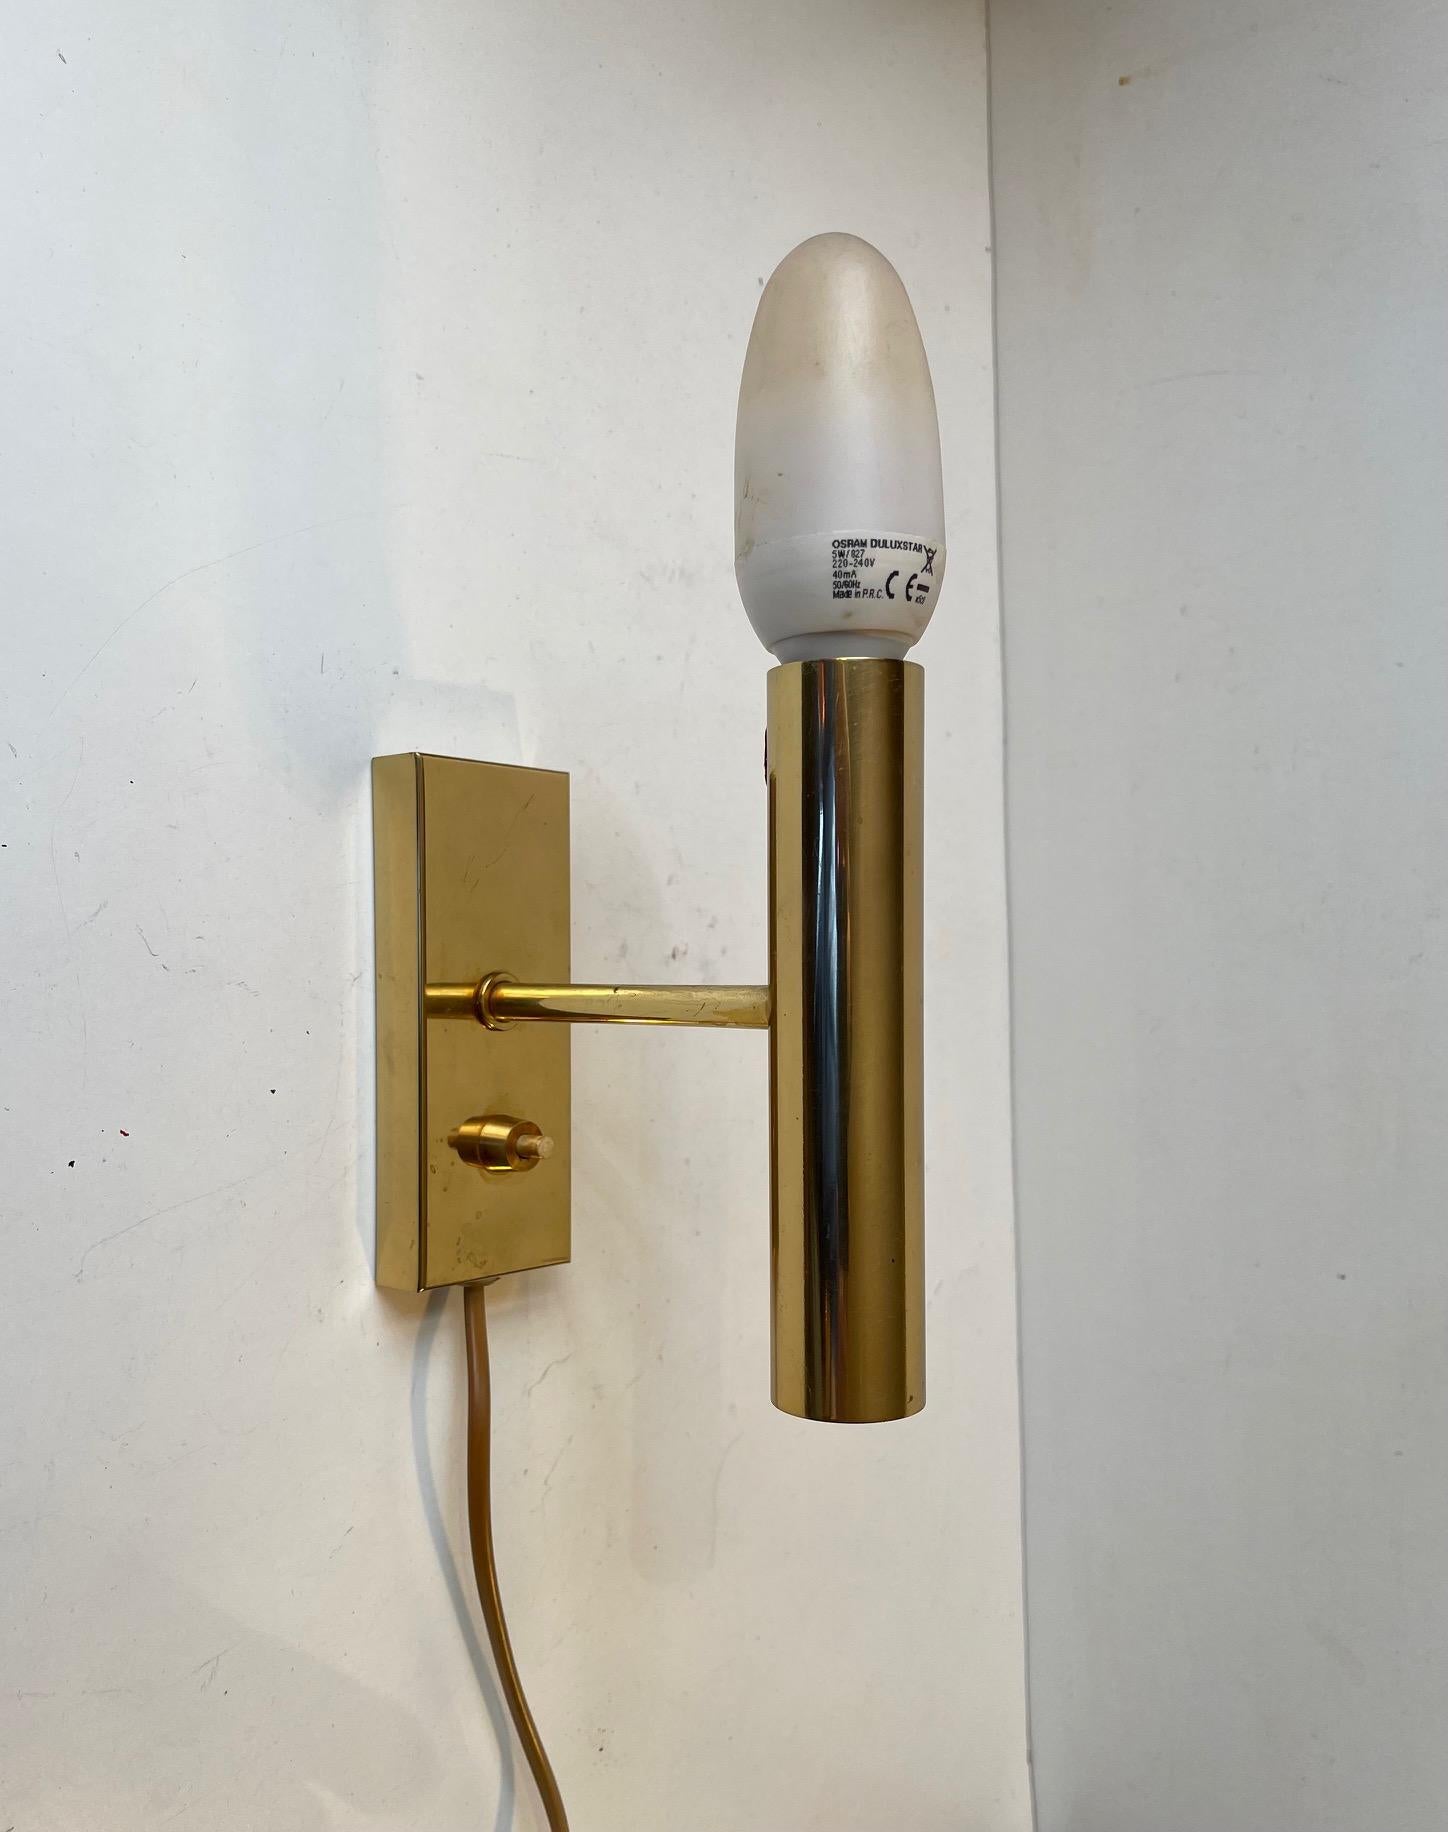 Danish Modern Green Wall Sconce in Brass by Fog & Mørup, 1970s For Sale 1